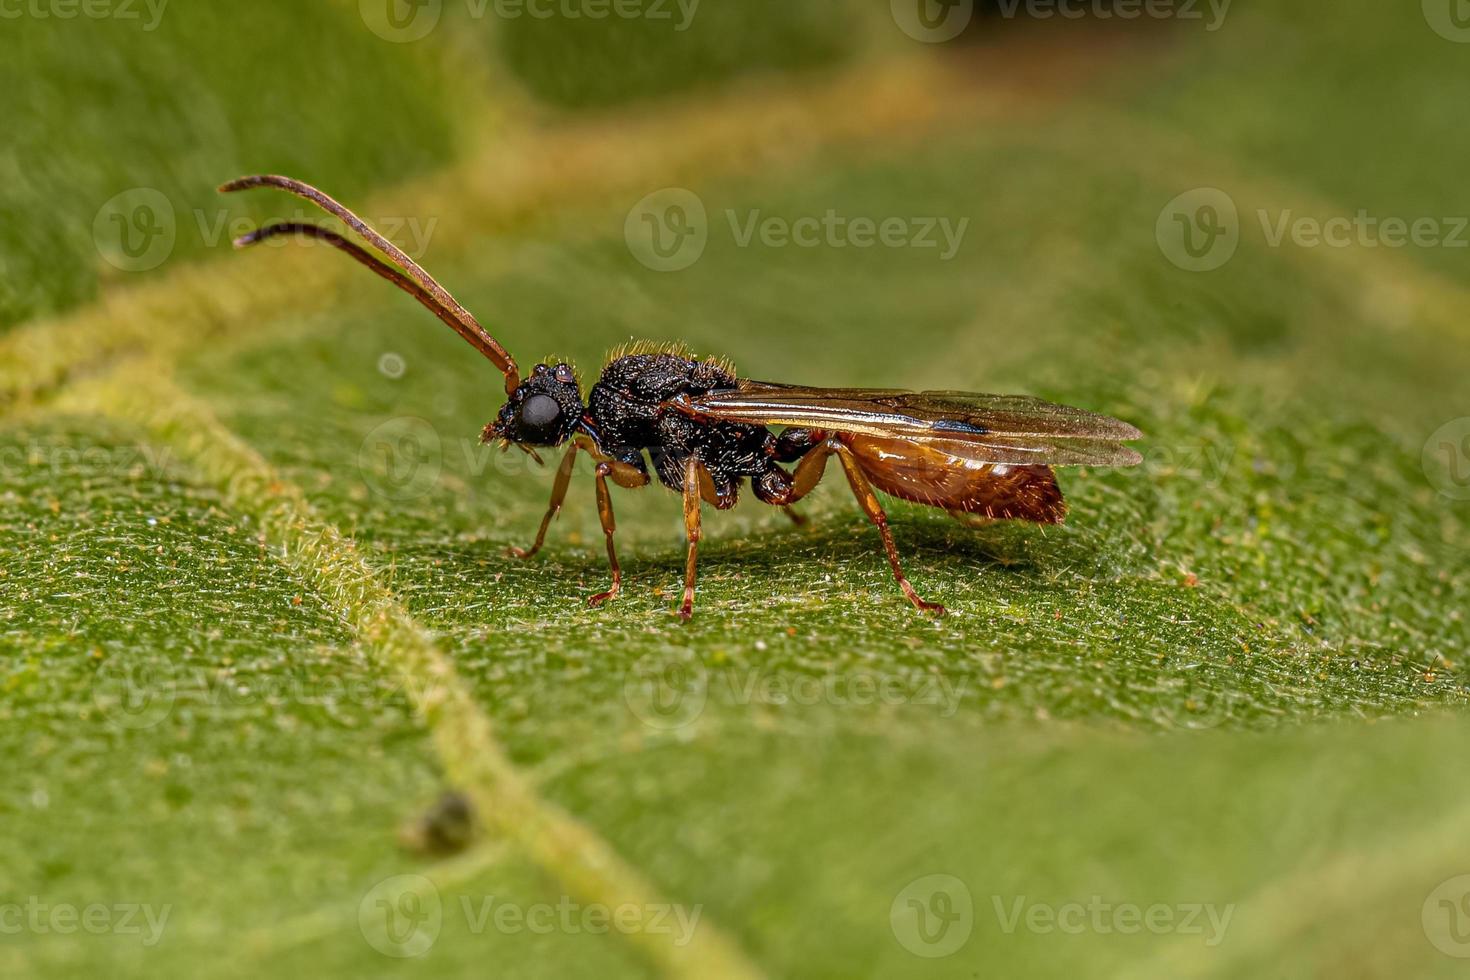 Adult Winged Male Ant photo